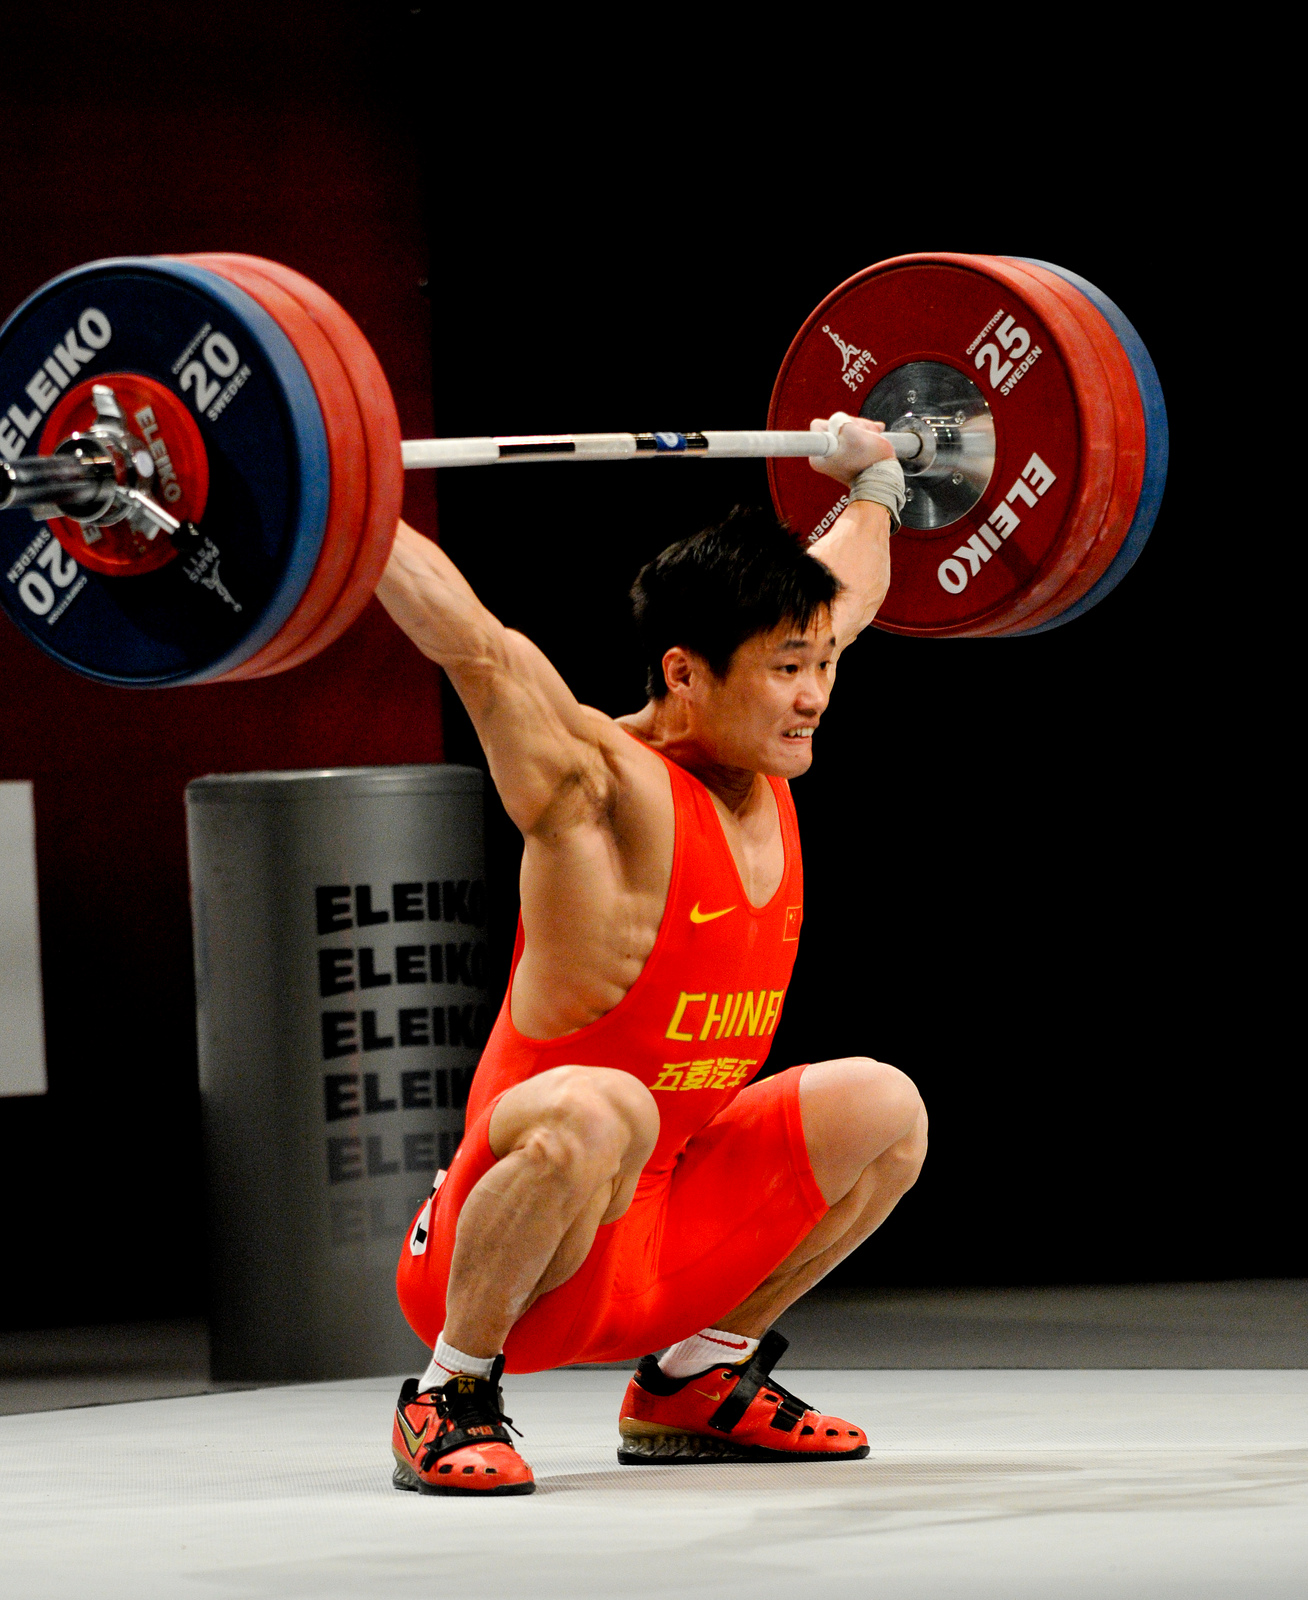 Athlete Performing a Snatch